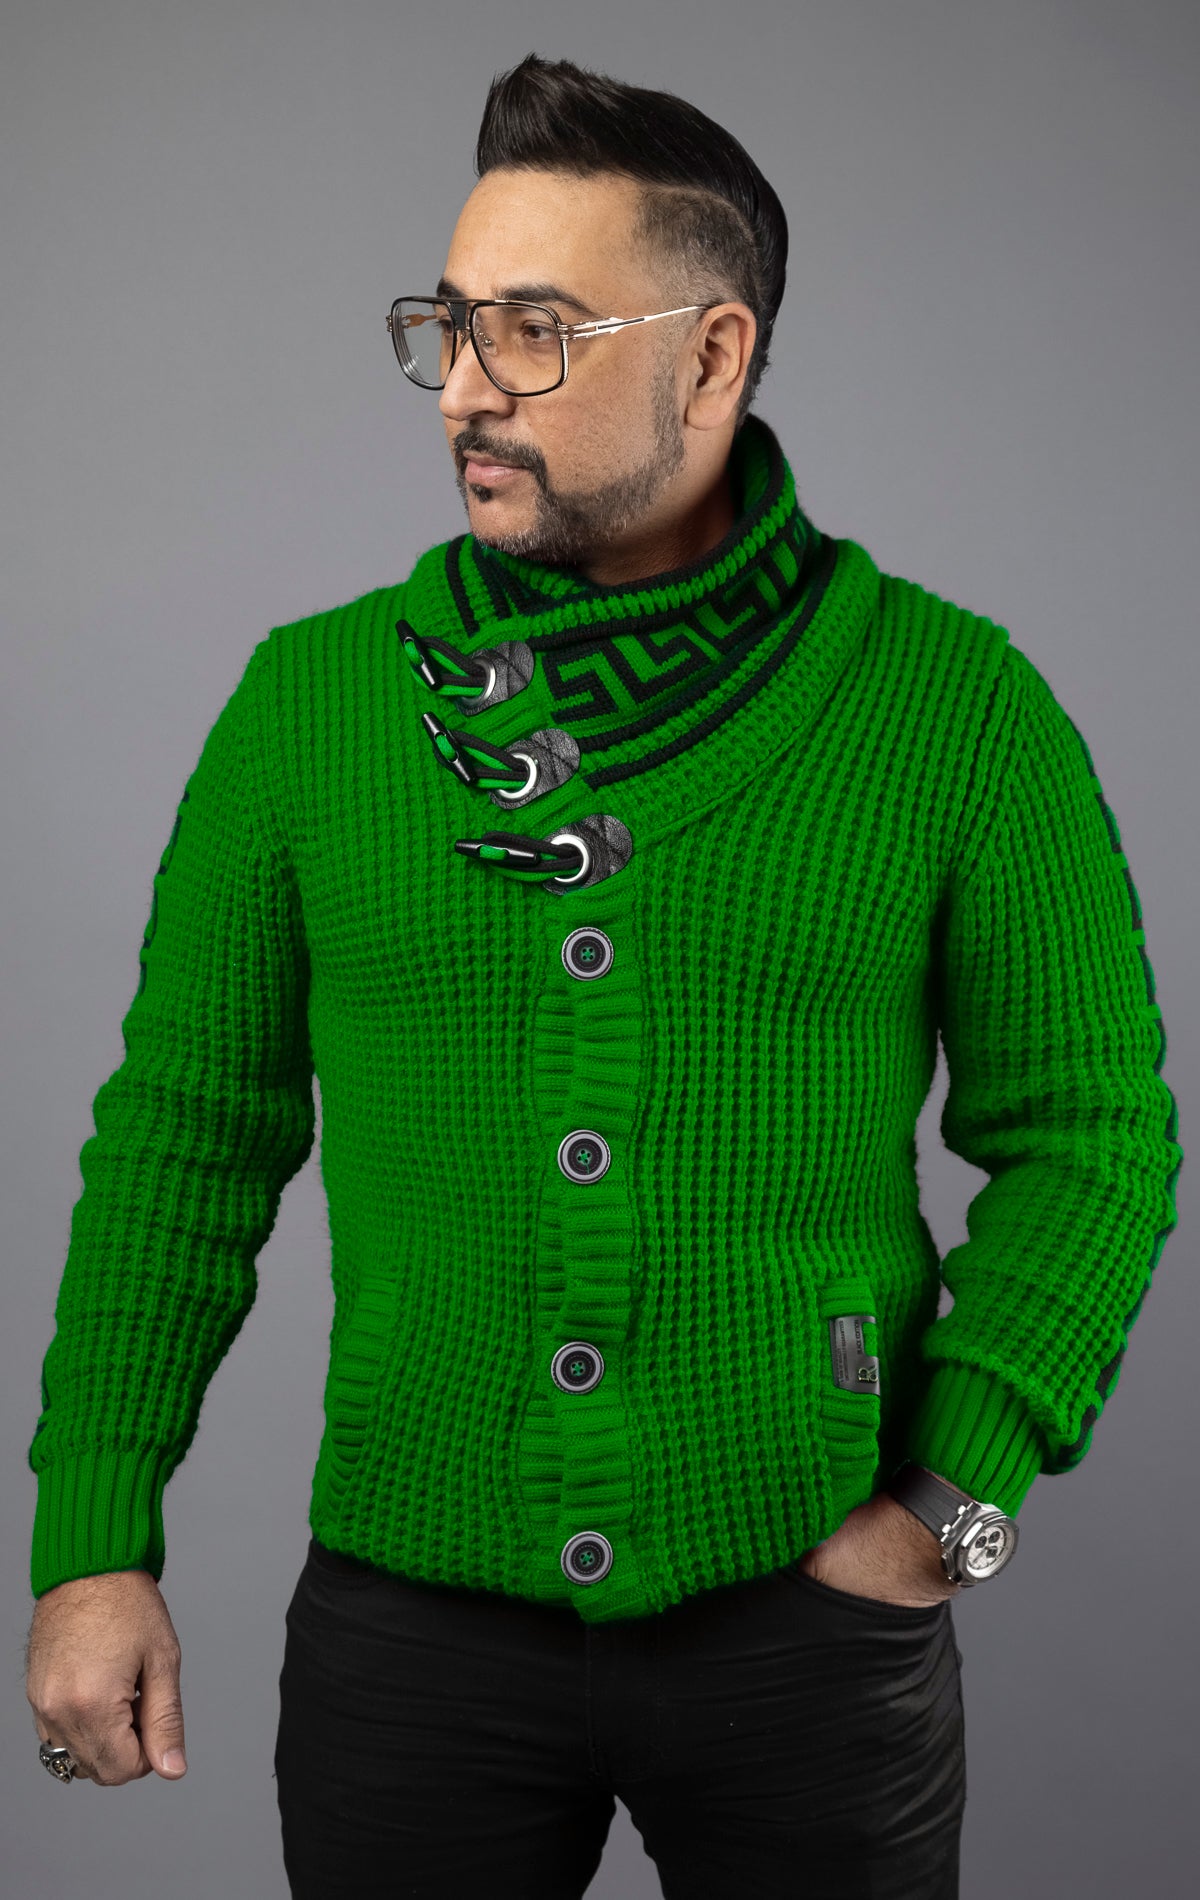 Green slim-fit luxury sweater. Featuring a heavy weight construction